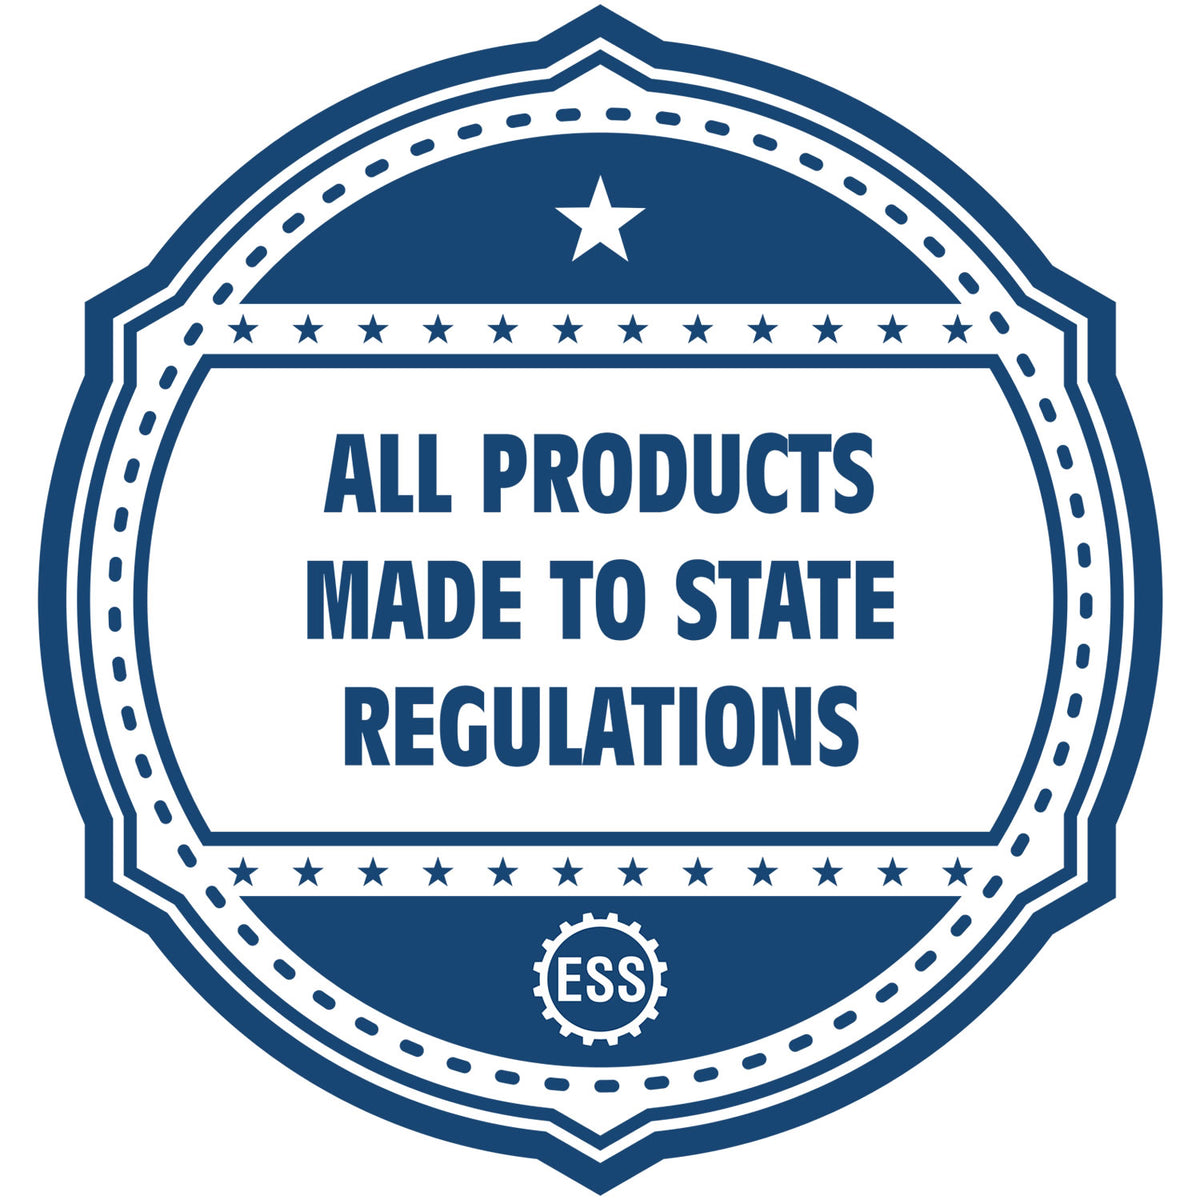 A blue icon or badge for the Delaware Professional Geologist Seal Stamp showing that this product is made in compliance with state regulations.